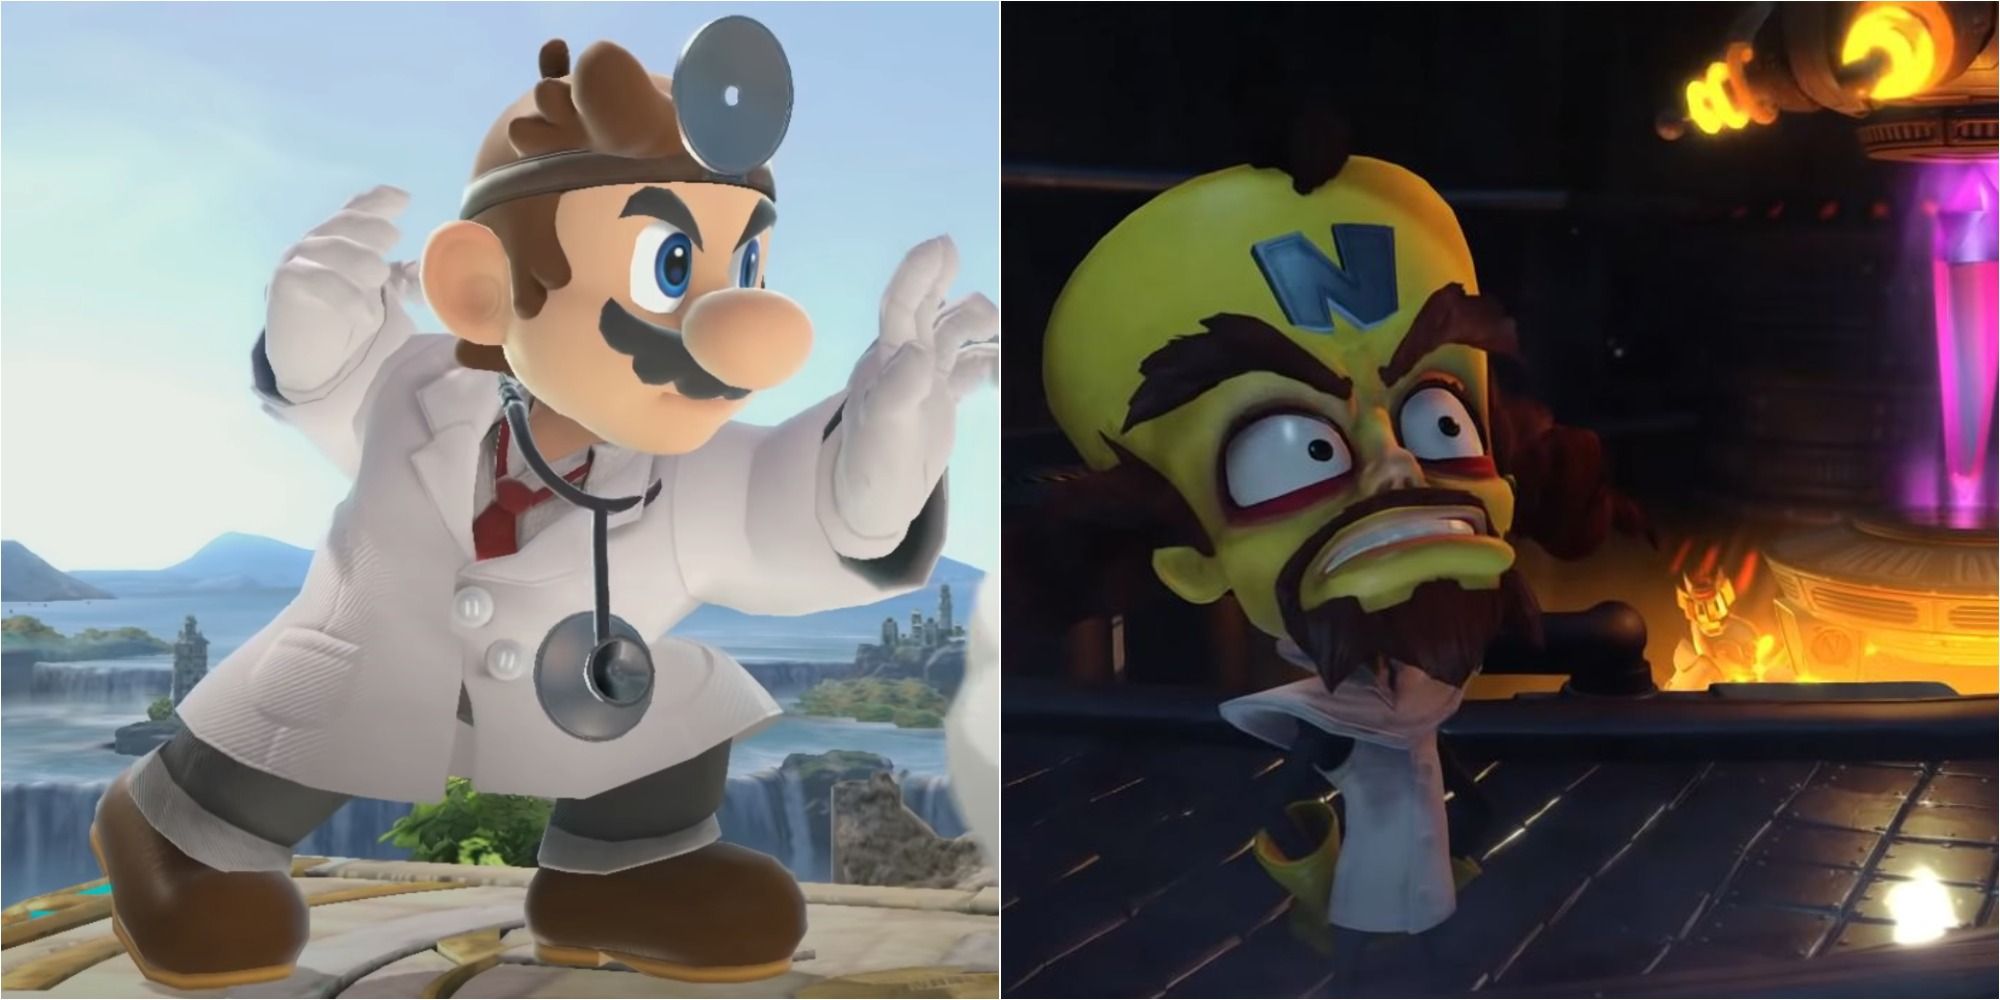 Video Game Doctors Featured Split Image Dr. Mario and Dr Cortex